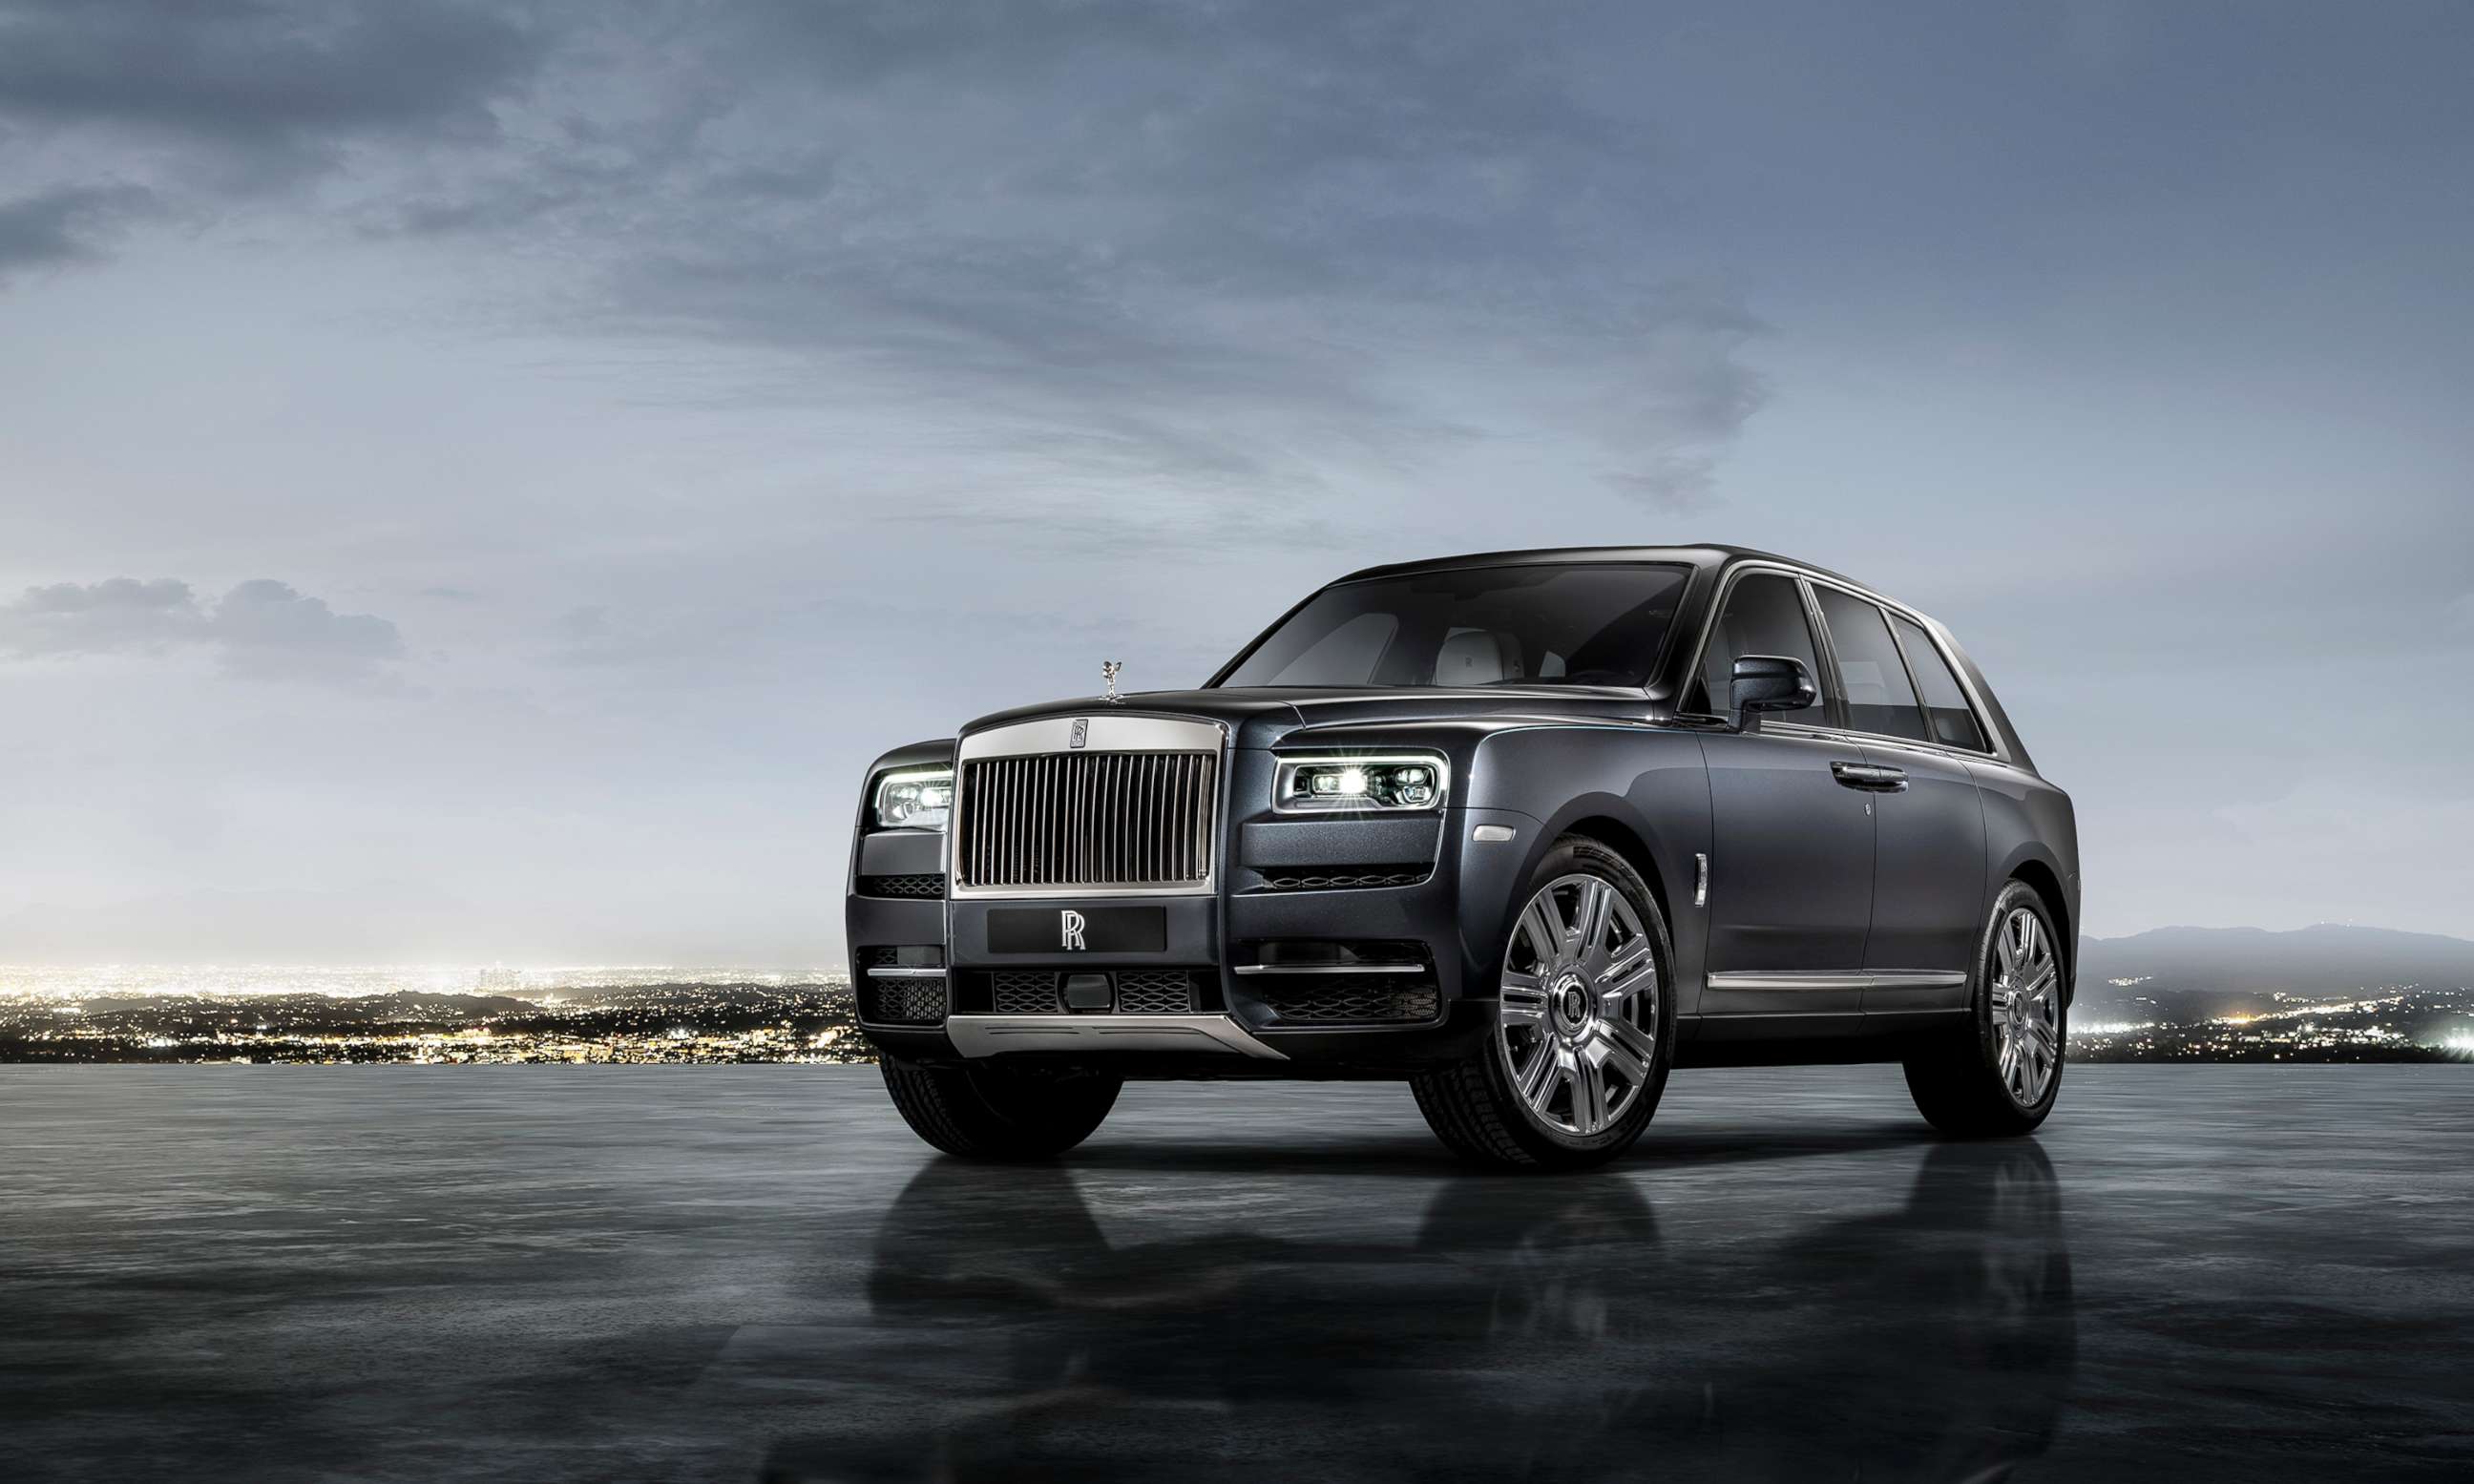 PHOTO: The Rolls-Royce Cullinan is being marketed as a "super-luxury" SUV.